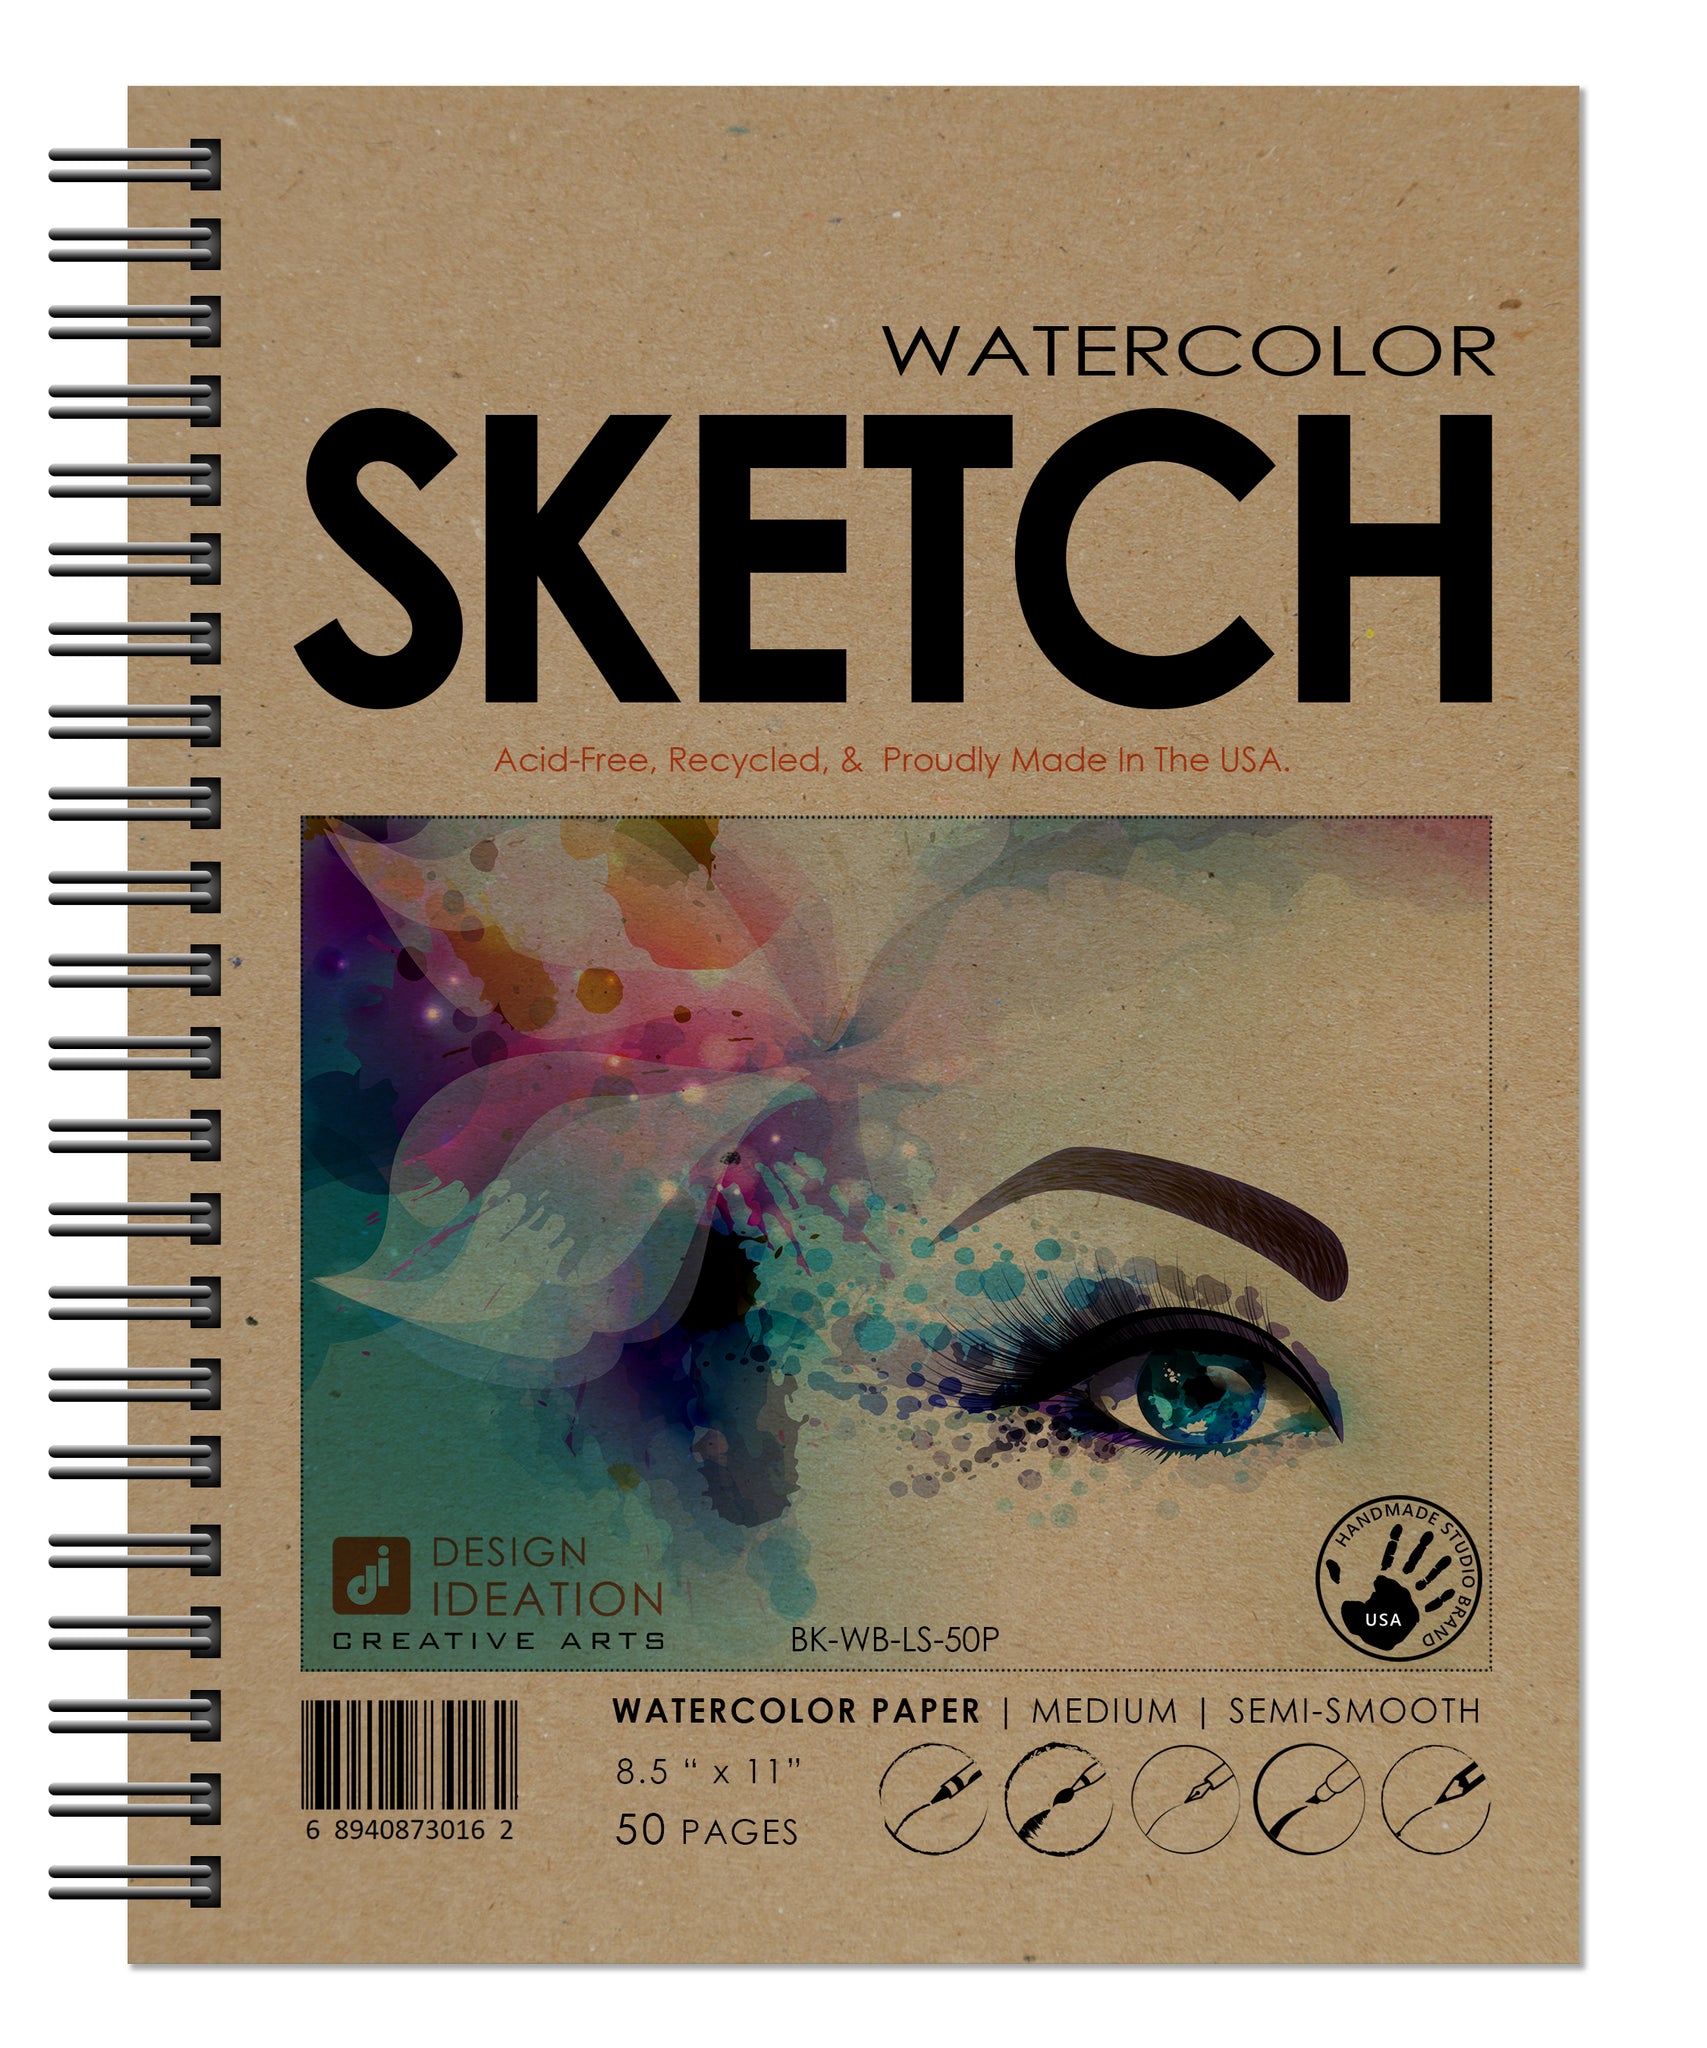 Design Ideation Horizontal Sketch Pad. Removable Sheet sketchpad for  Pencil, Ink, Marker, Charcoal and Watercolor Paints. Great for Art, Design  and